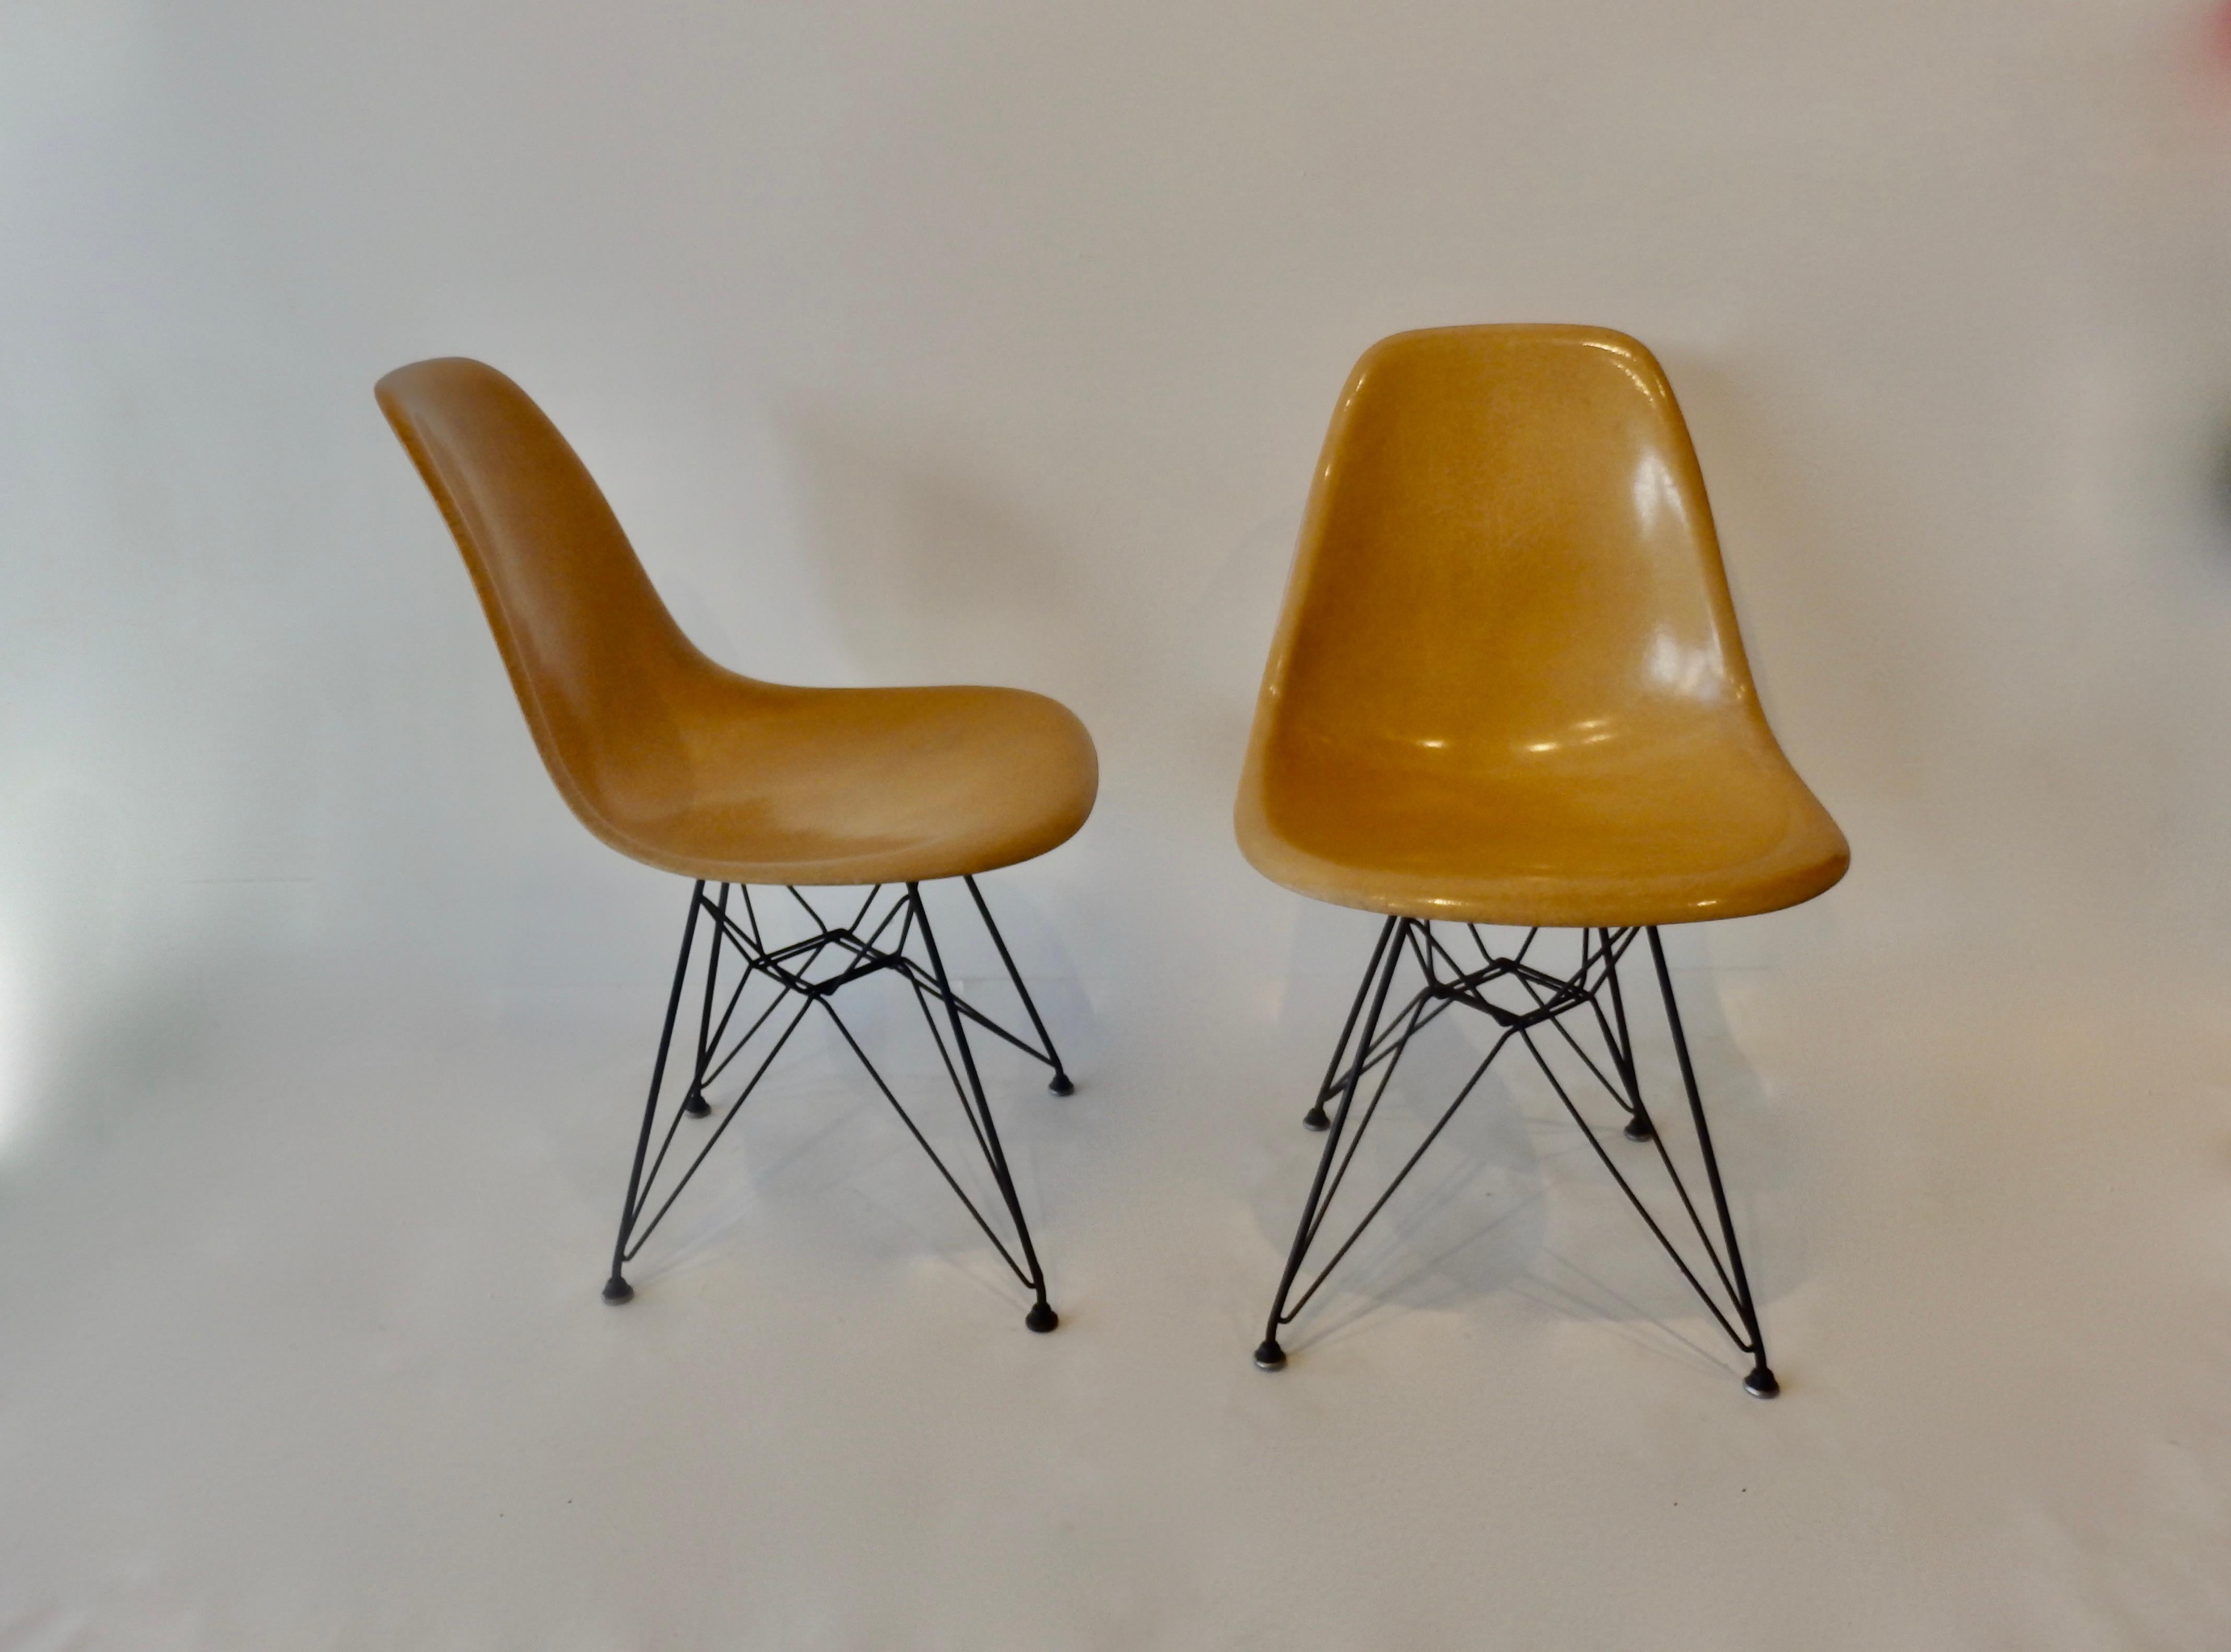 Pair of Eames Fiberglass DSR Chairs on Eiffel Tower Bases In Good Condition For Sale In Ferndale, MI